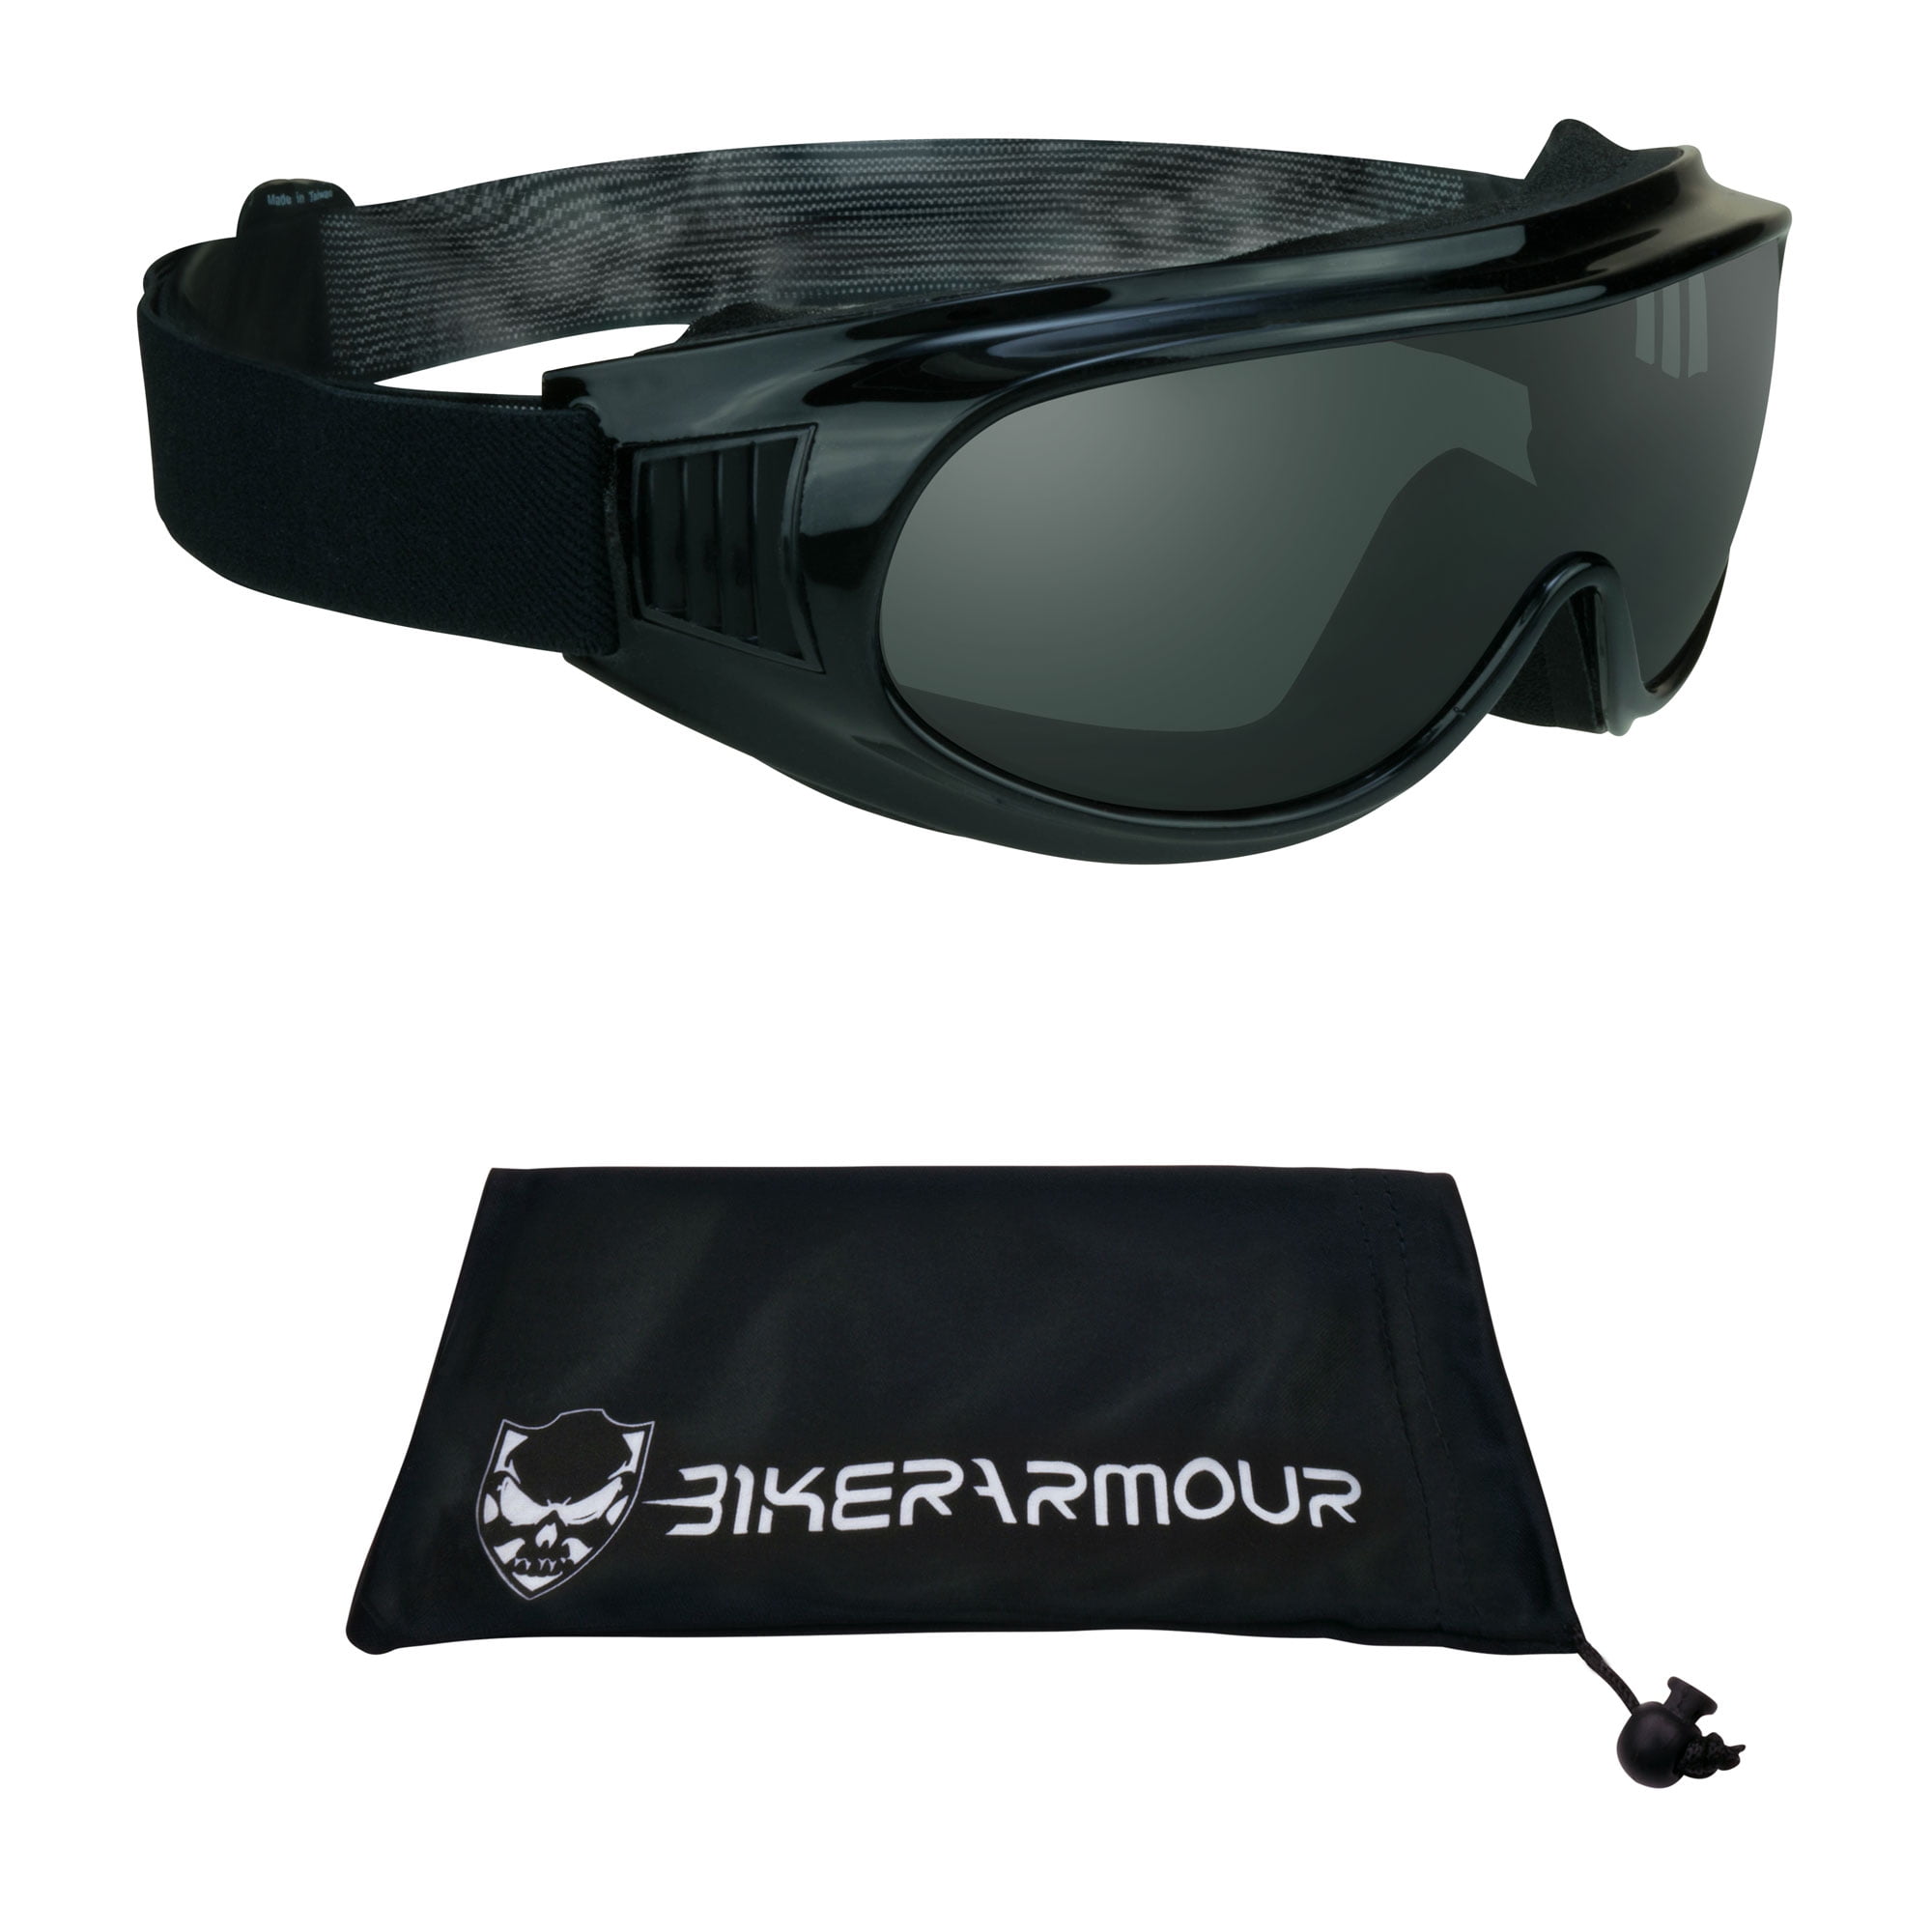 Motorcycle Ridding Glasses Goggles Protective Eye Wear 